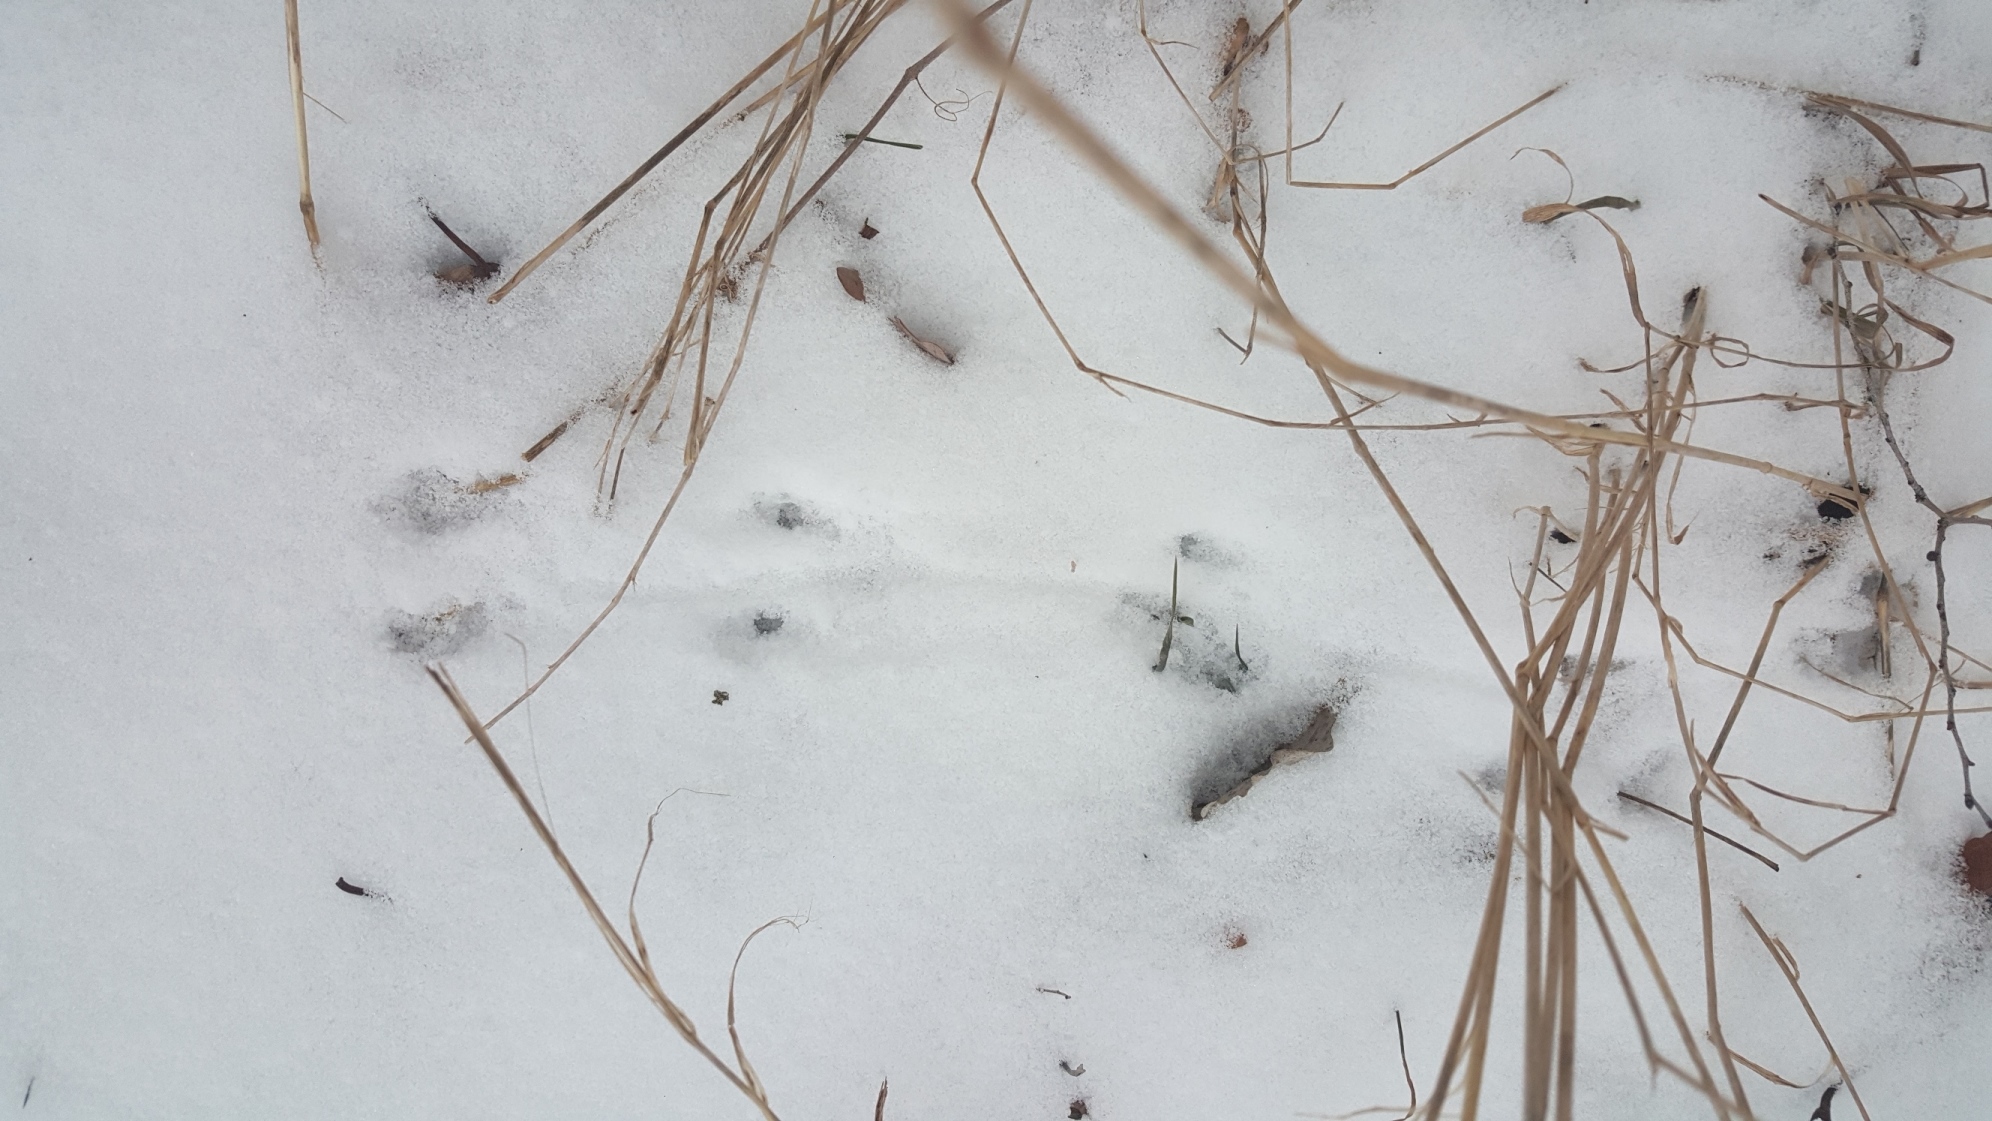 A close up of mouse tracks in the snow shows the animal's tail impression too.